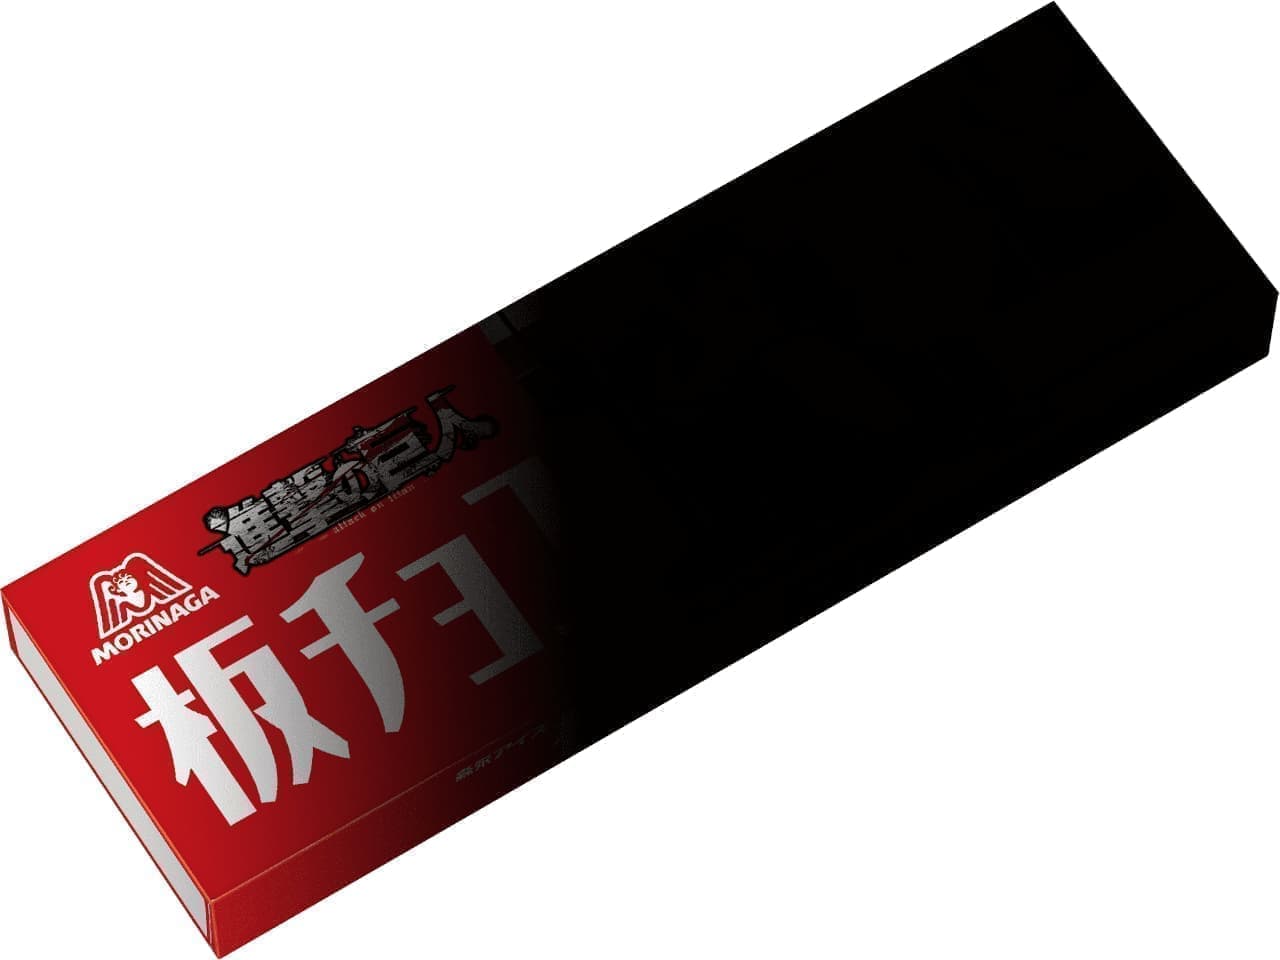 Morinaga & Co., Ltd. "Chocolate Chocolate Ice Attack on Titan Back Cover Package"